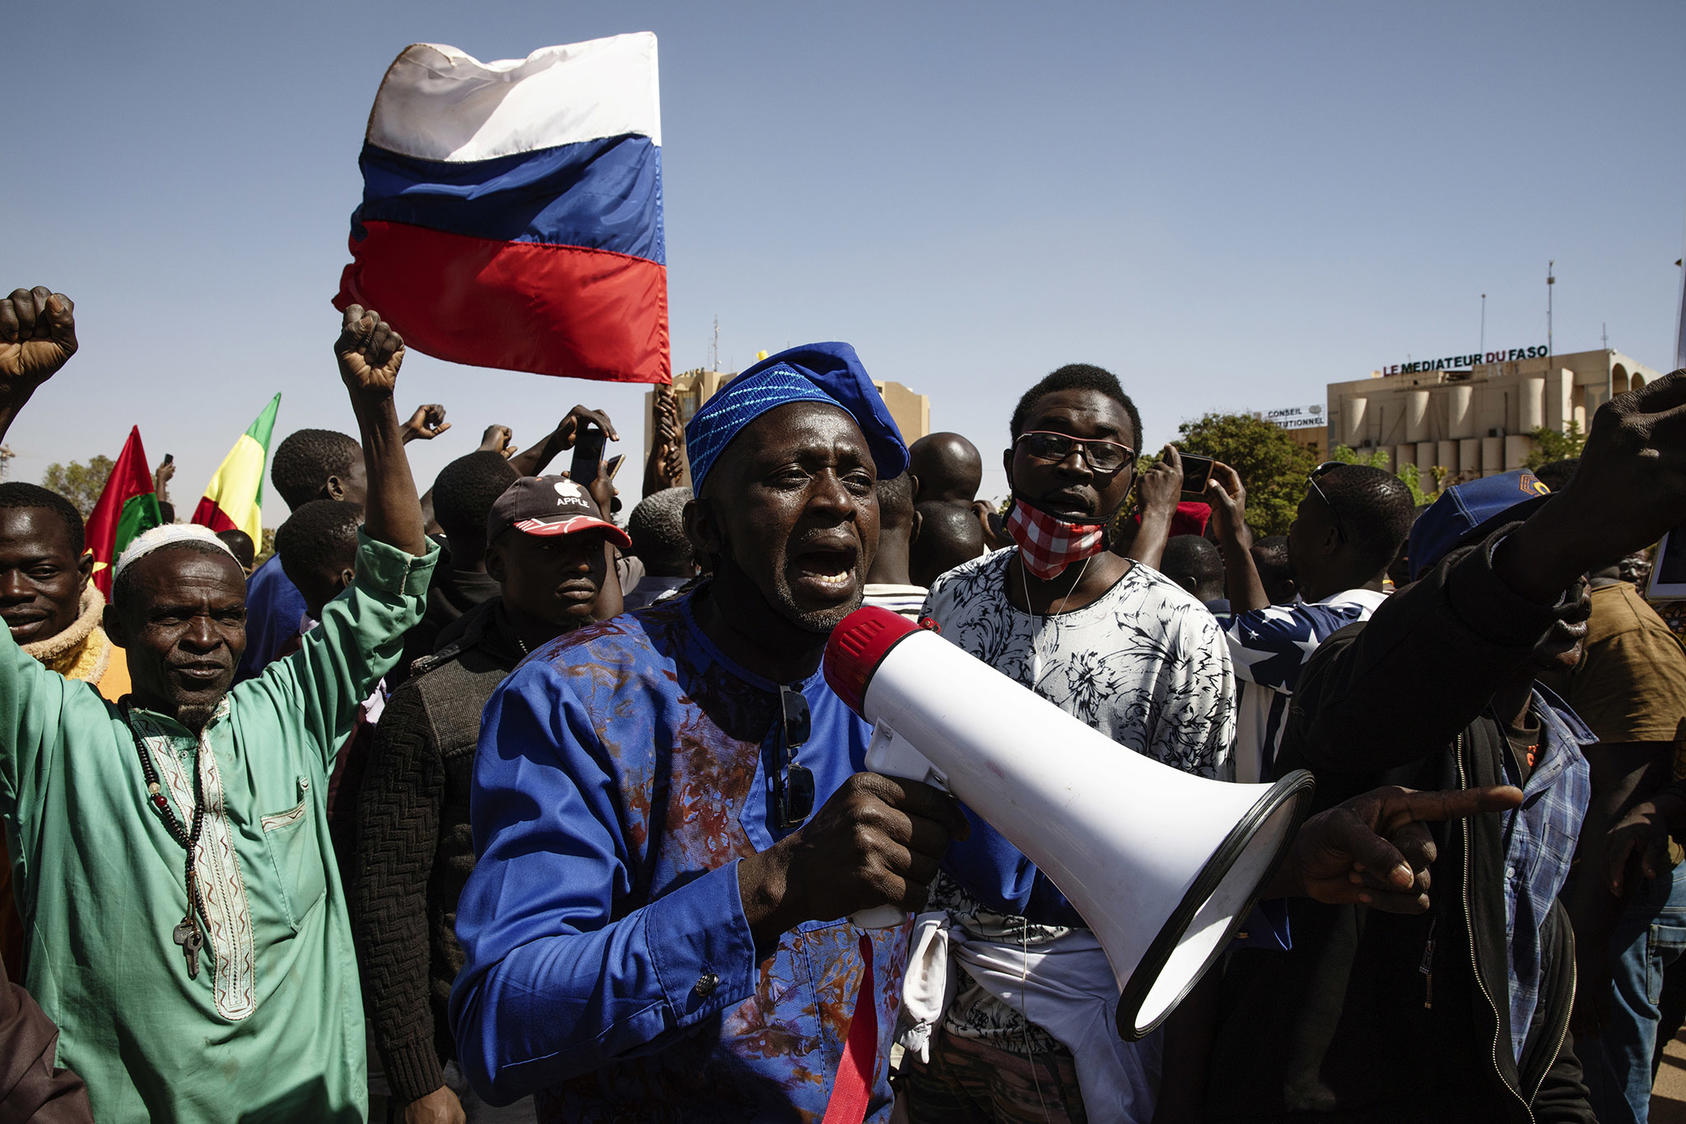 Men support Burkina Faso’s January coup with a Russian flag—a jab at France amid anger at insecurity under the prior civilian government, backed by French forces. Most Burkinabe citizens reject coups in research surveys. (Malin Fezehai/The New York Times)